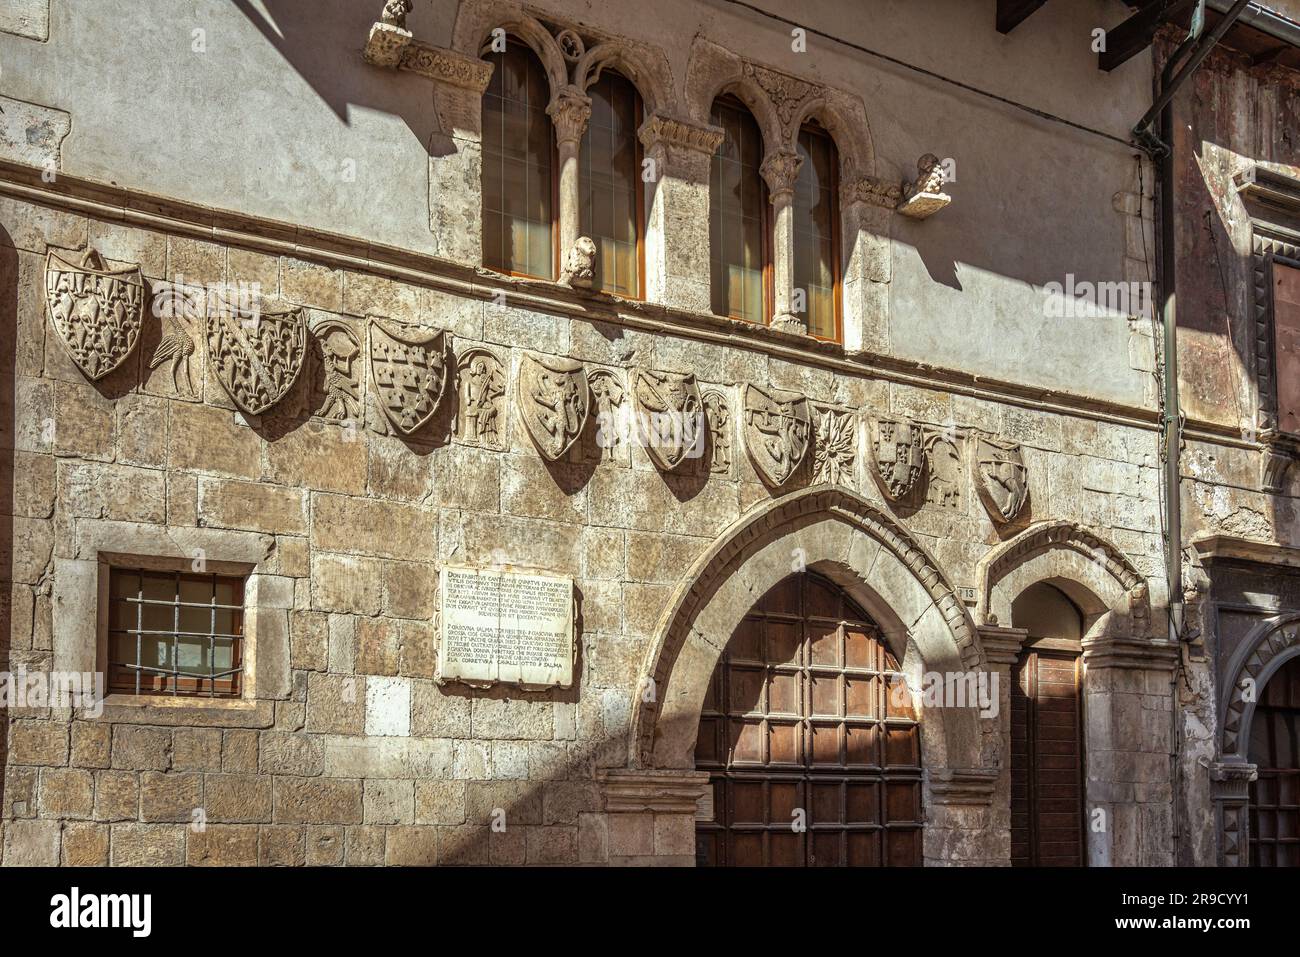 The facade of the Ducal Tavern of Popoli with the heraldic coats of arms of the families related to the Cantelmo and D'Angiò. Popoli, Abruzzo Stock Photo